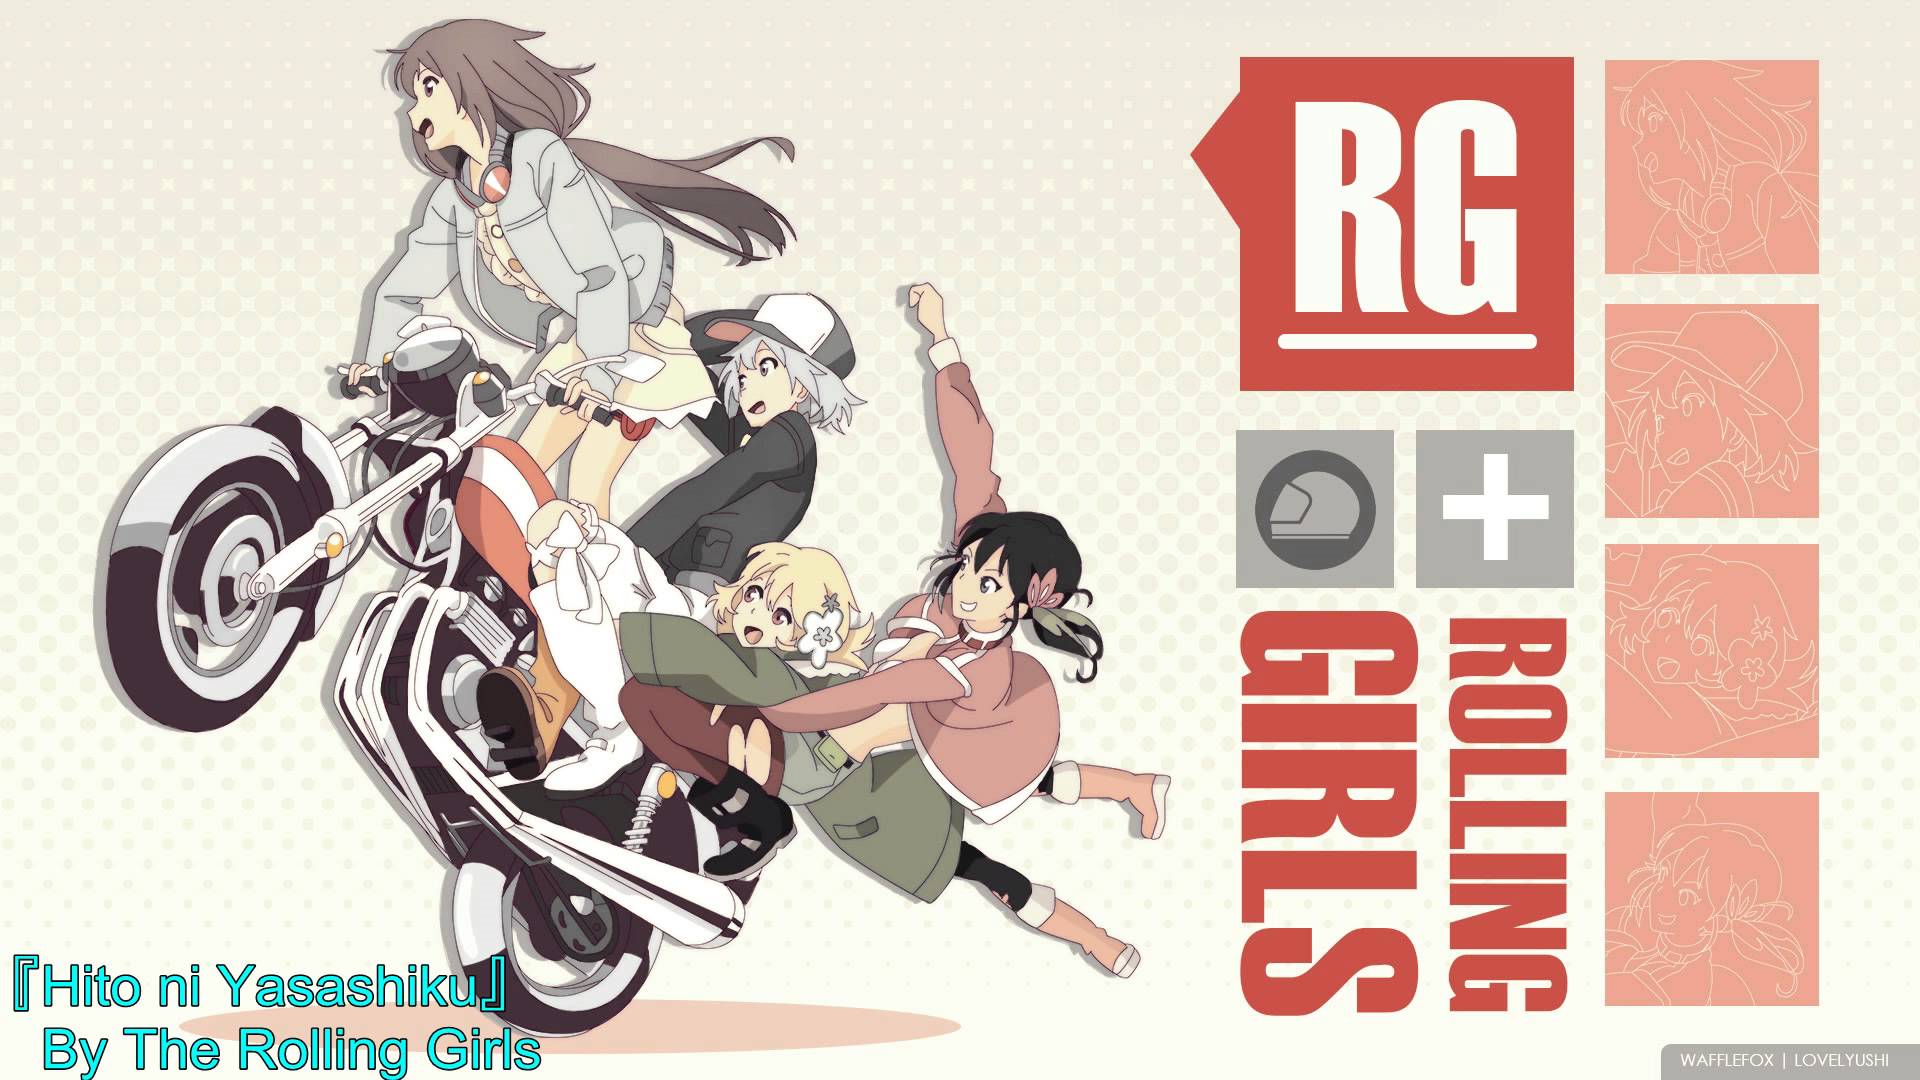 The Rolling Girls #7